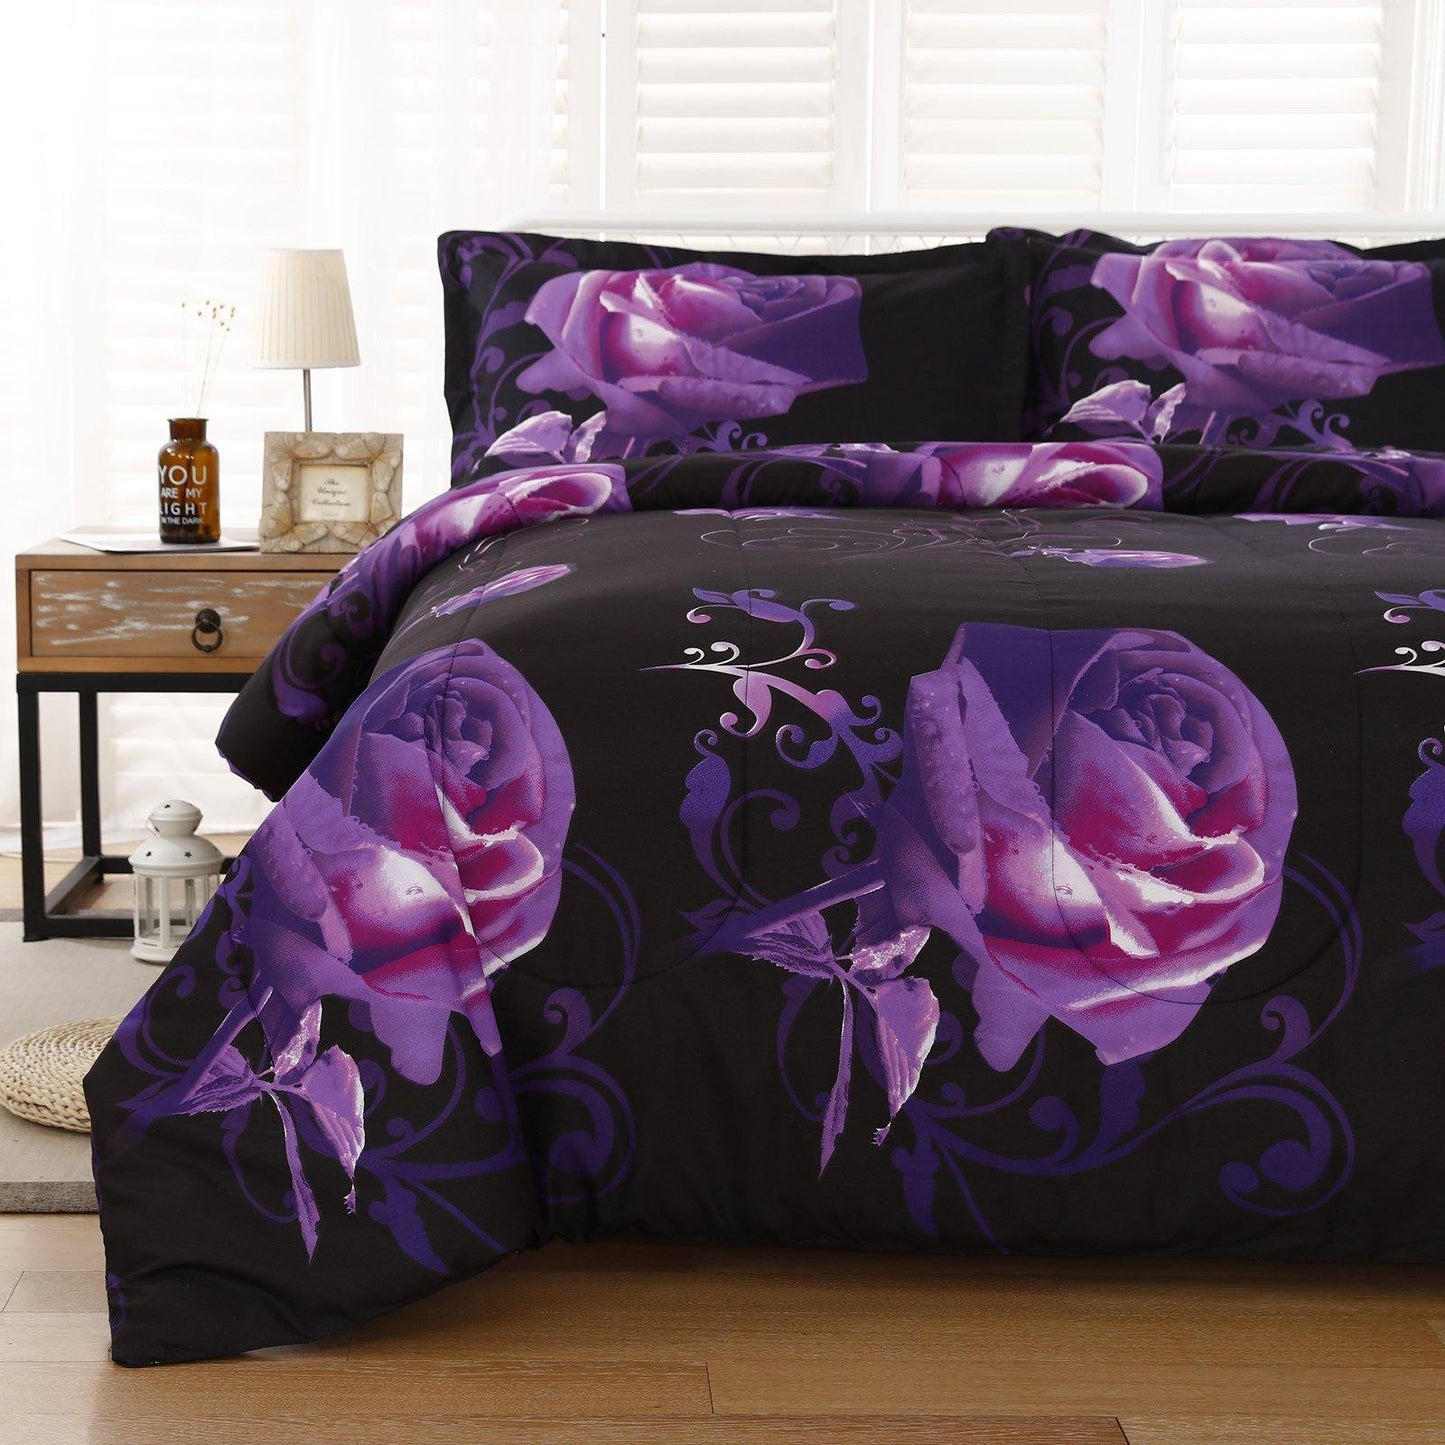 WONGS BEDDING Beautiful bright flowers comforter set bedroom bedding 3 Pieces Bedding Comforter with 2 Pillow Cases suitable for the whole season - Wongs bedding